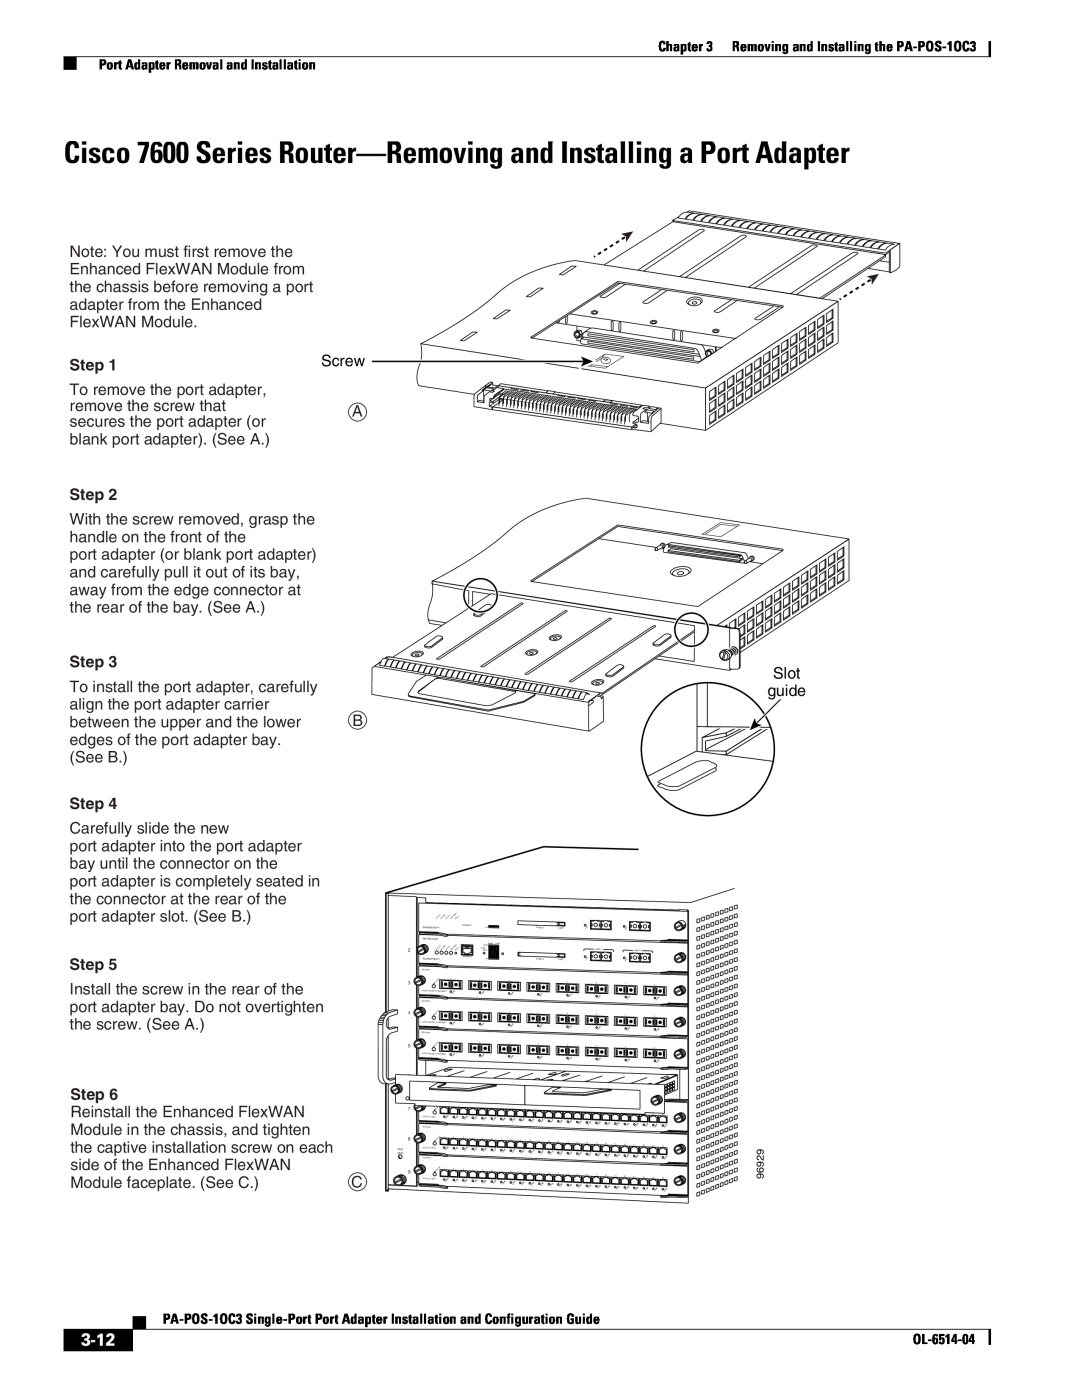 Cisco Systems PA-POS-2OC3, PA-POS-1OC3 manual Cisco 7600 Series Router-Removing and Installing a Port Adapter, 3-12, Step 